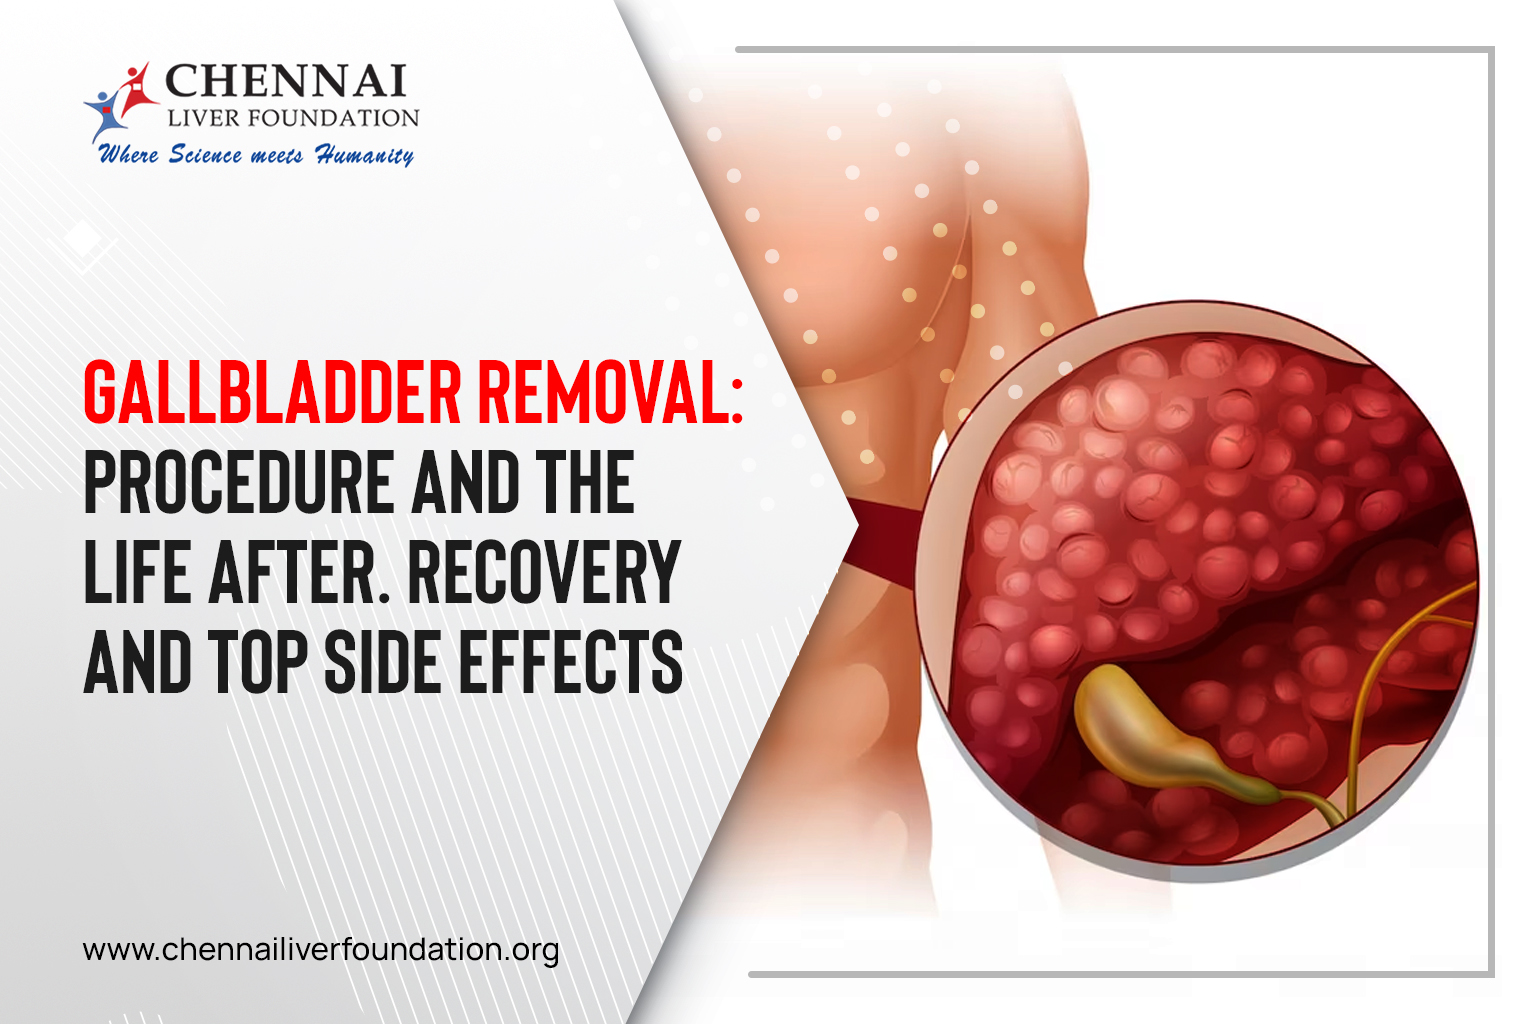 Gallbladder removal: procedure and the life after. Recovery and top side effects - Chennai Liver Foundation